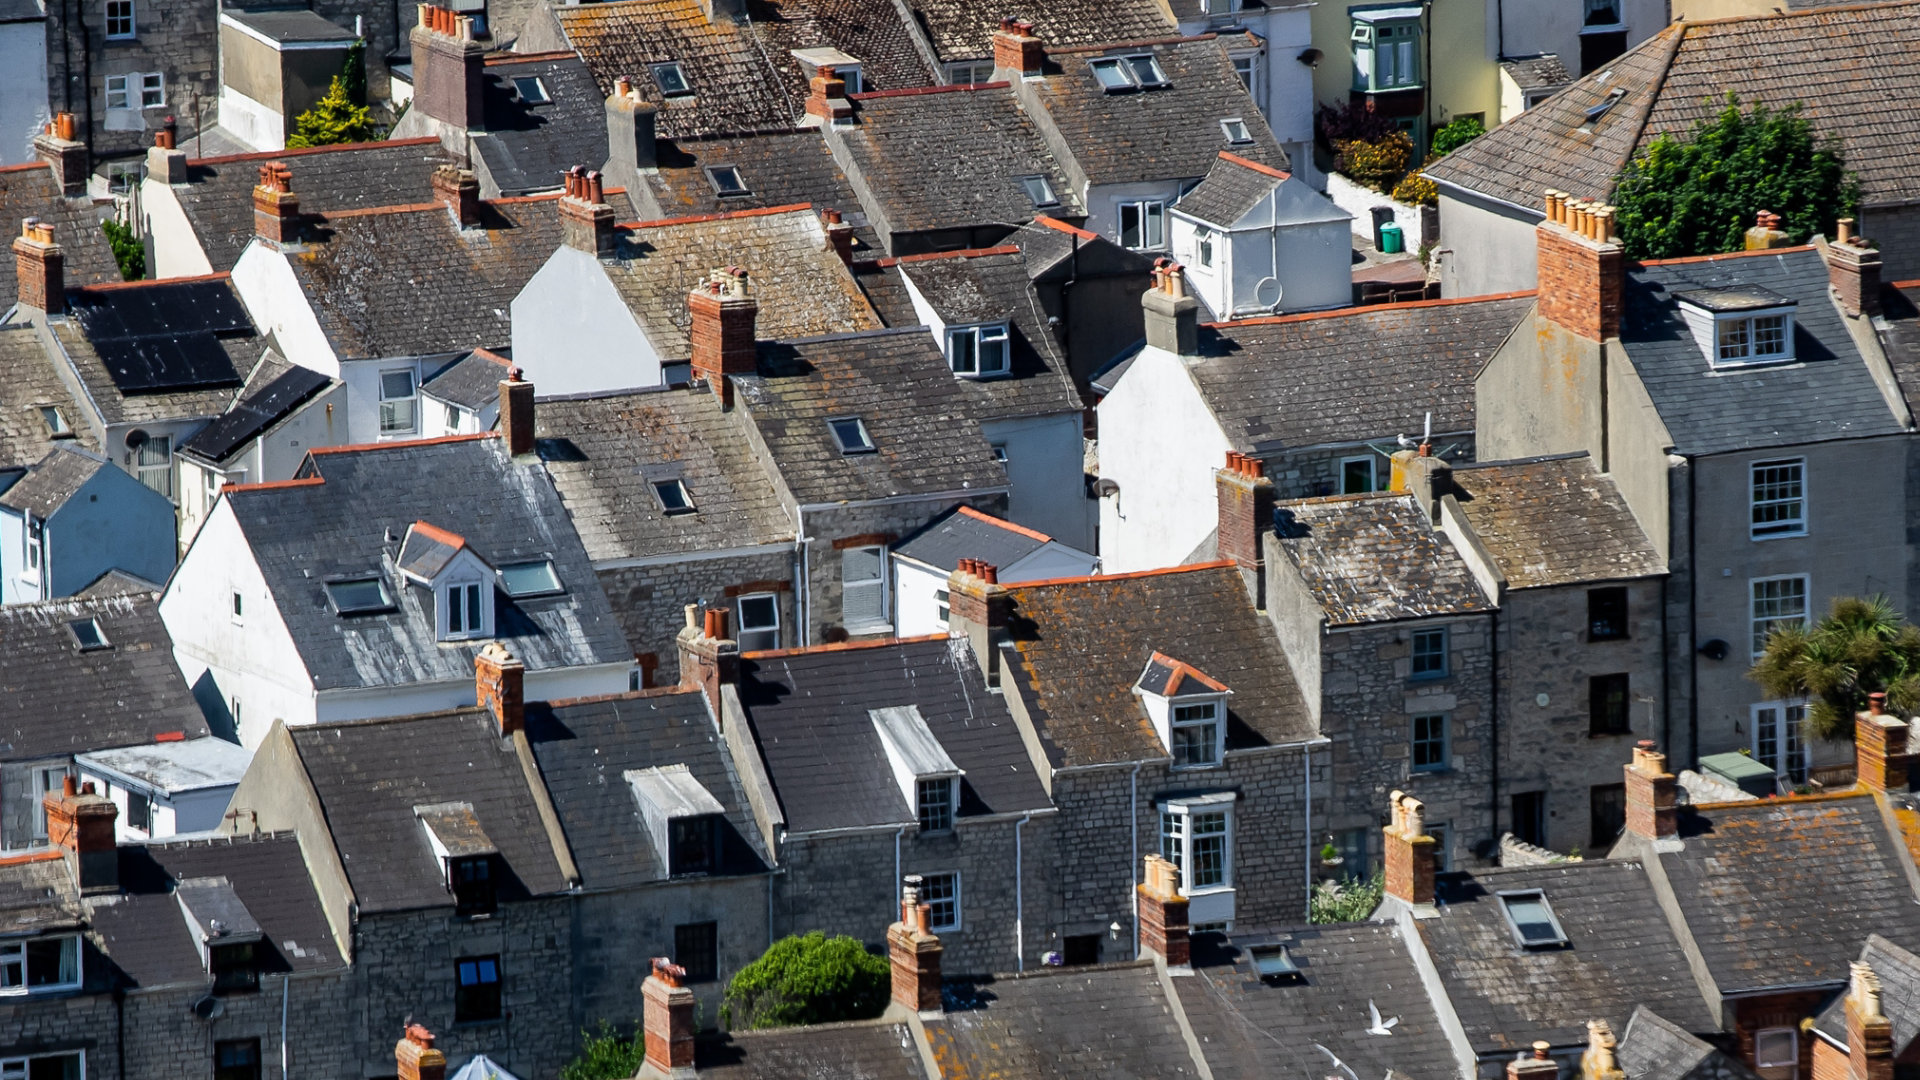 An overview of terraced housing in the UK